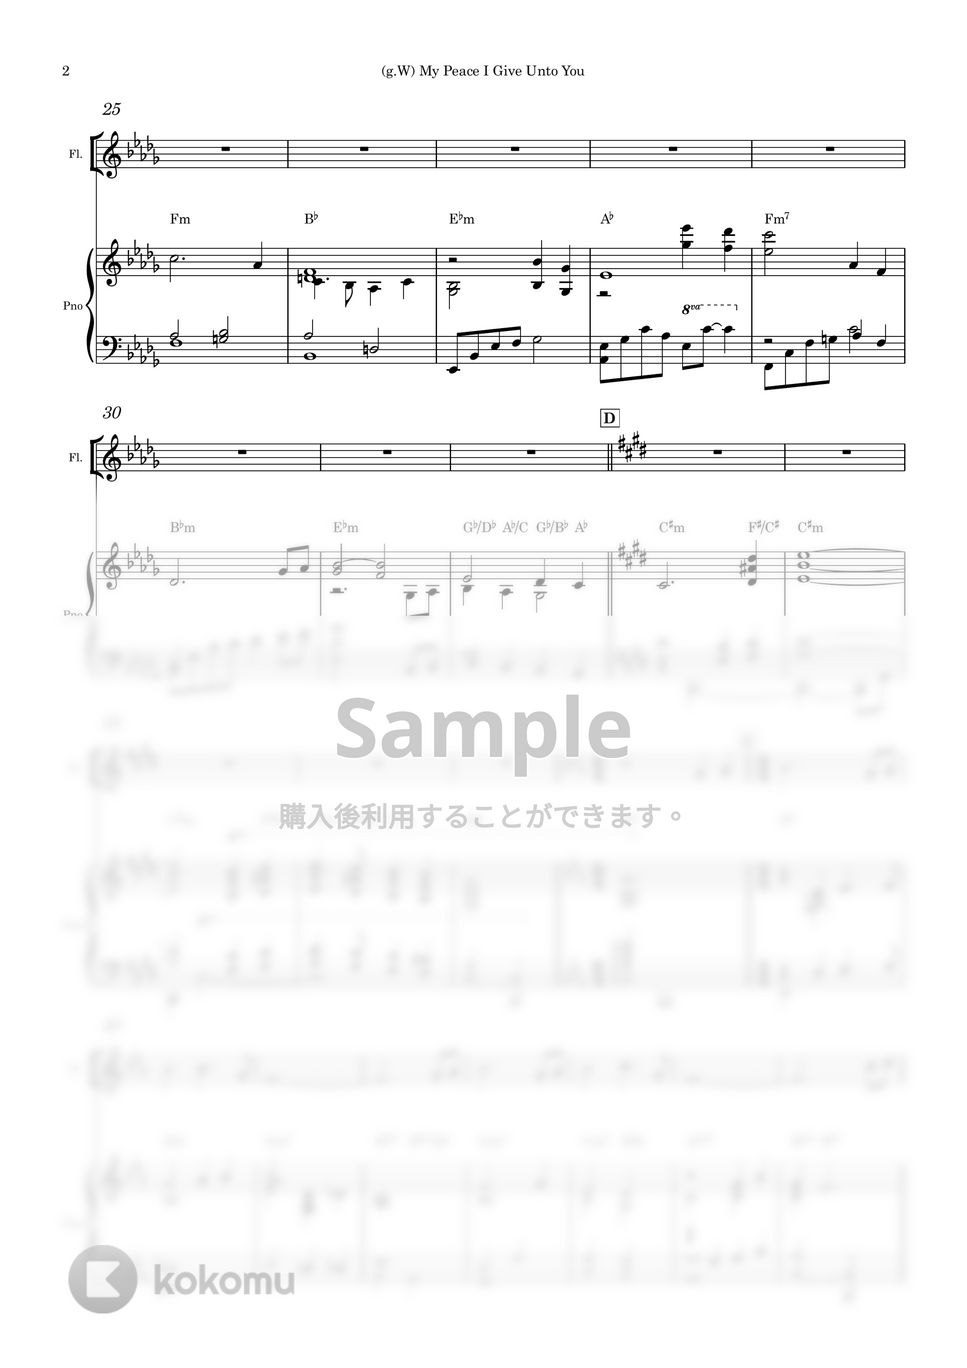 keith Routledge - 平安を君に与えよ My peace I give unto you (デュエット/ピアノと楽器) by Piano QQQ